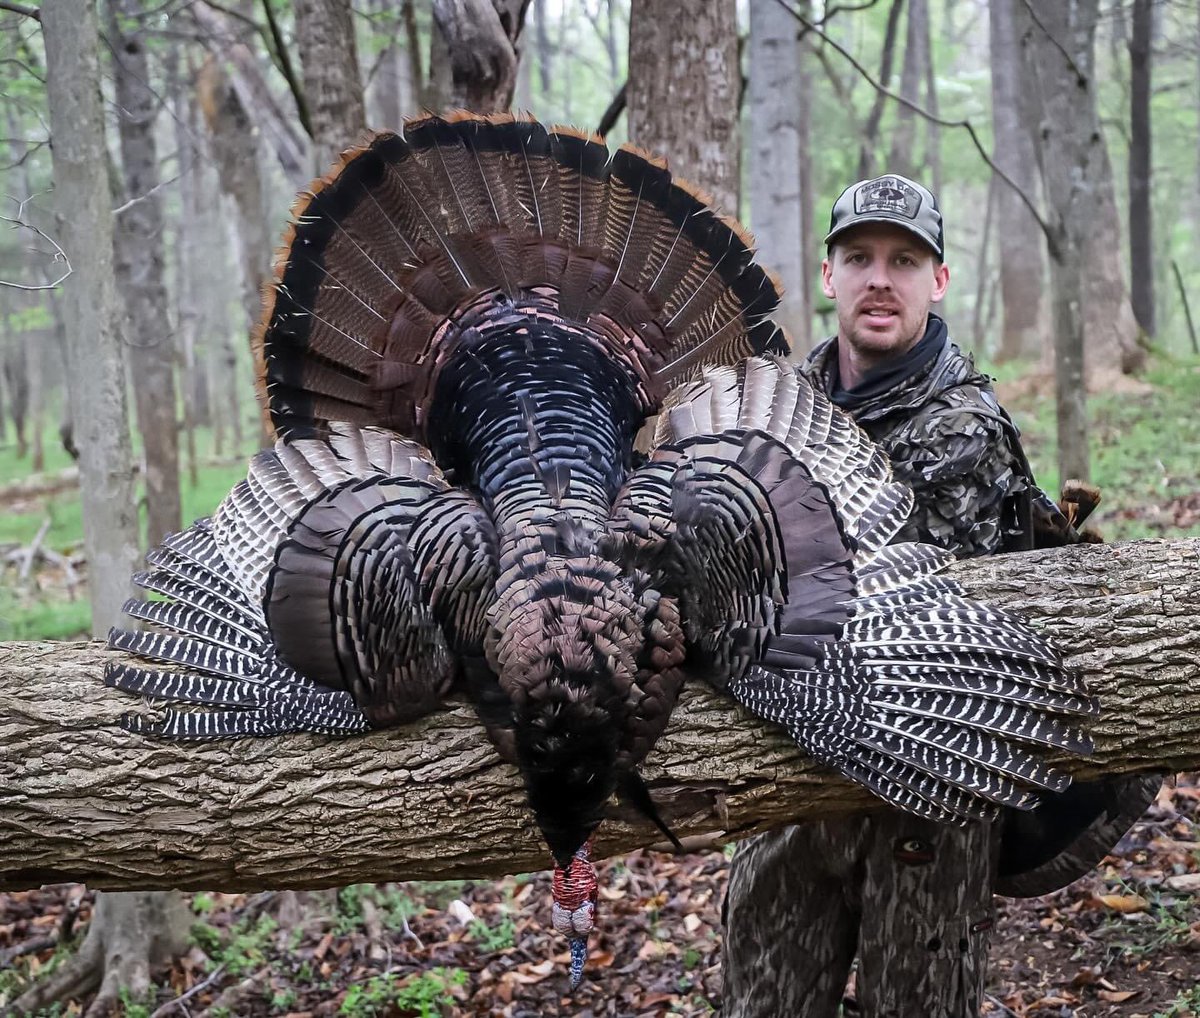 Another one! Big Virginia woods gobbler down for Kyle Crickenberger! #foxpro #turkeyhunting #turkeyseason #weliveforthis